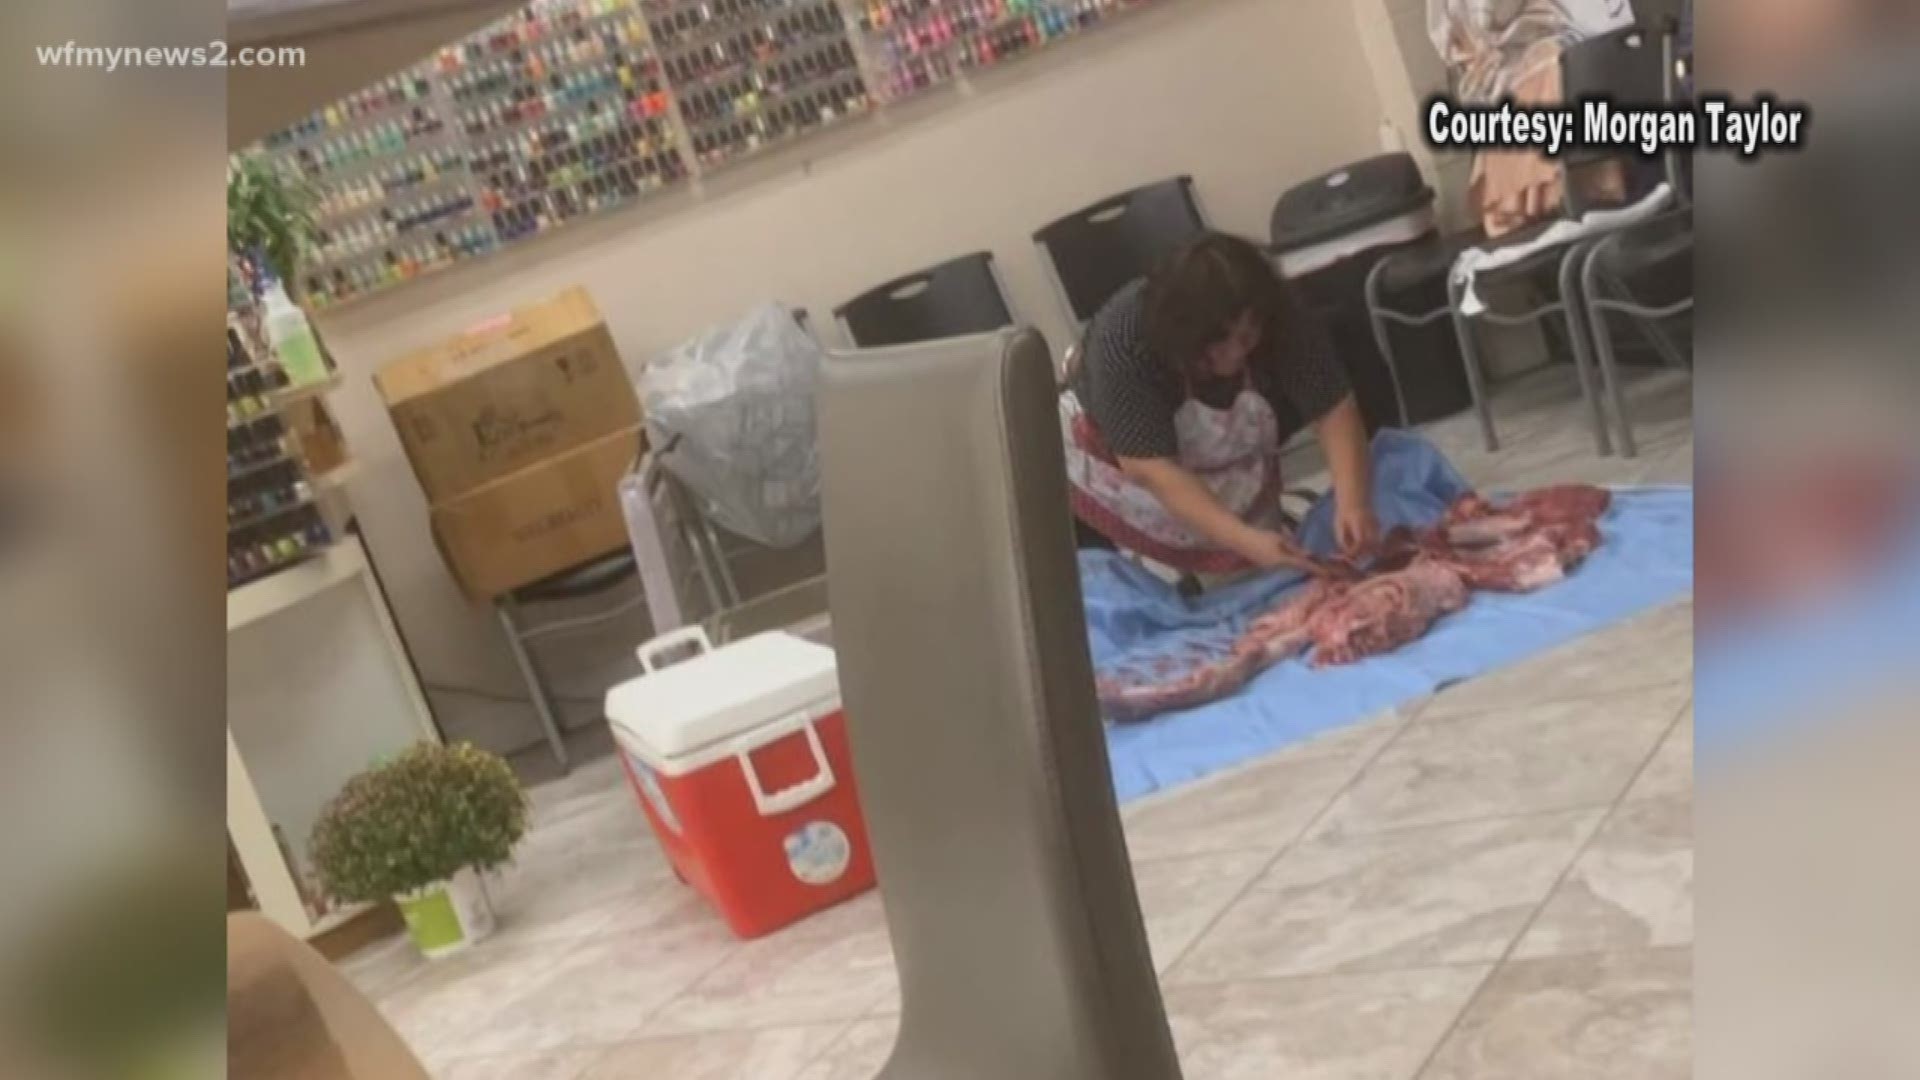 The North Carolina Board of Cosmetic Art Examiners say Diamond Nails in High Point is not unsanitary for butchering a deer in the middle of the salon.